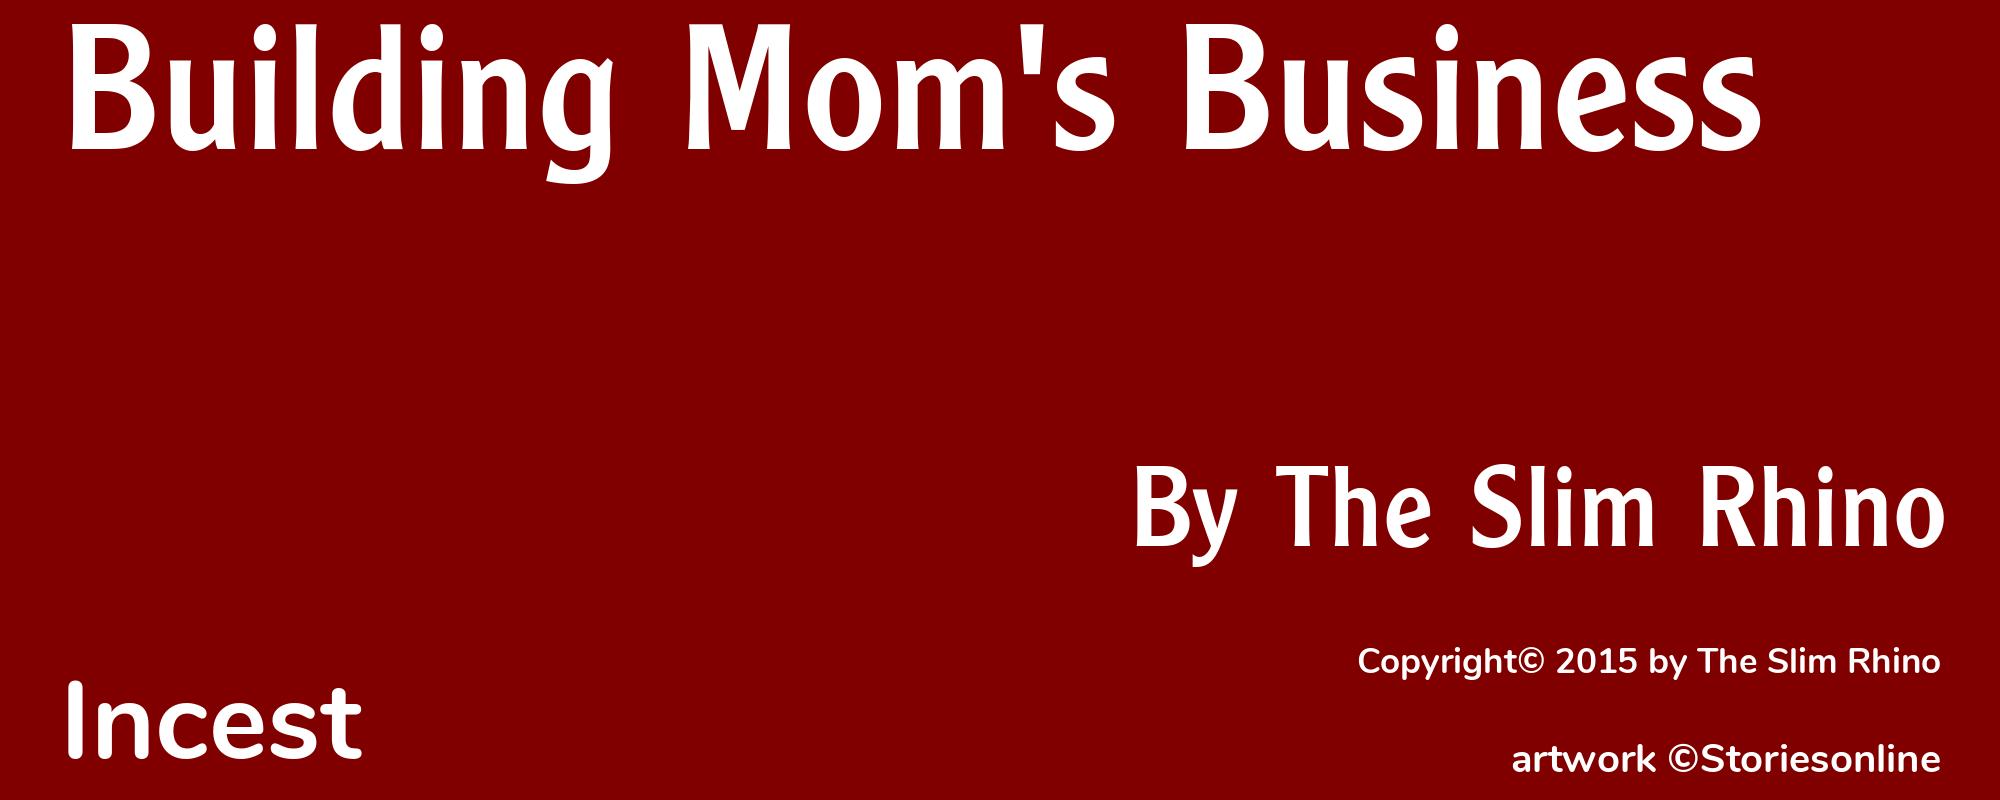 Building Mom's Business - Cover